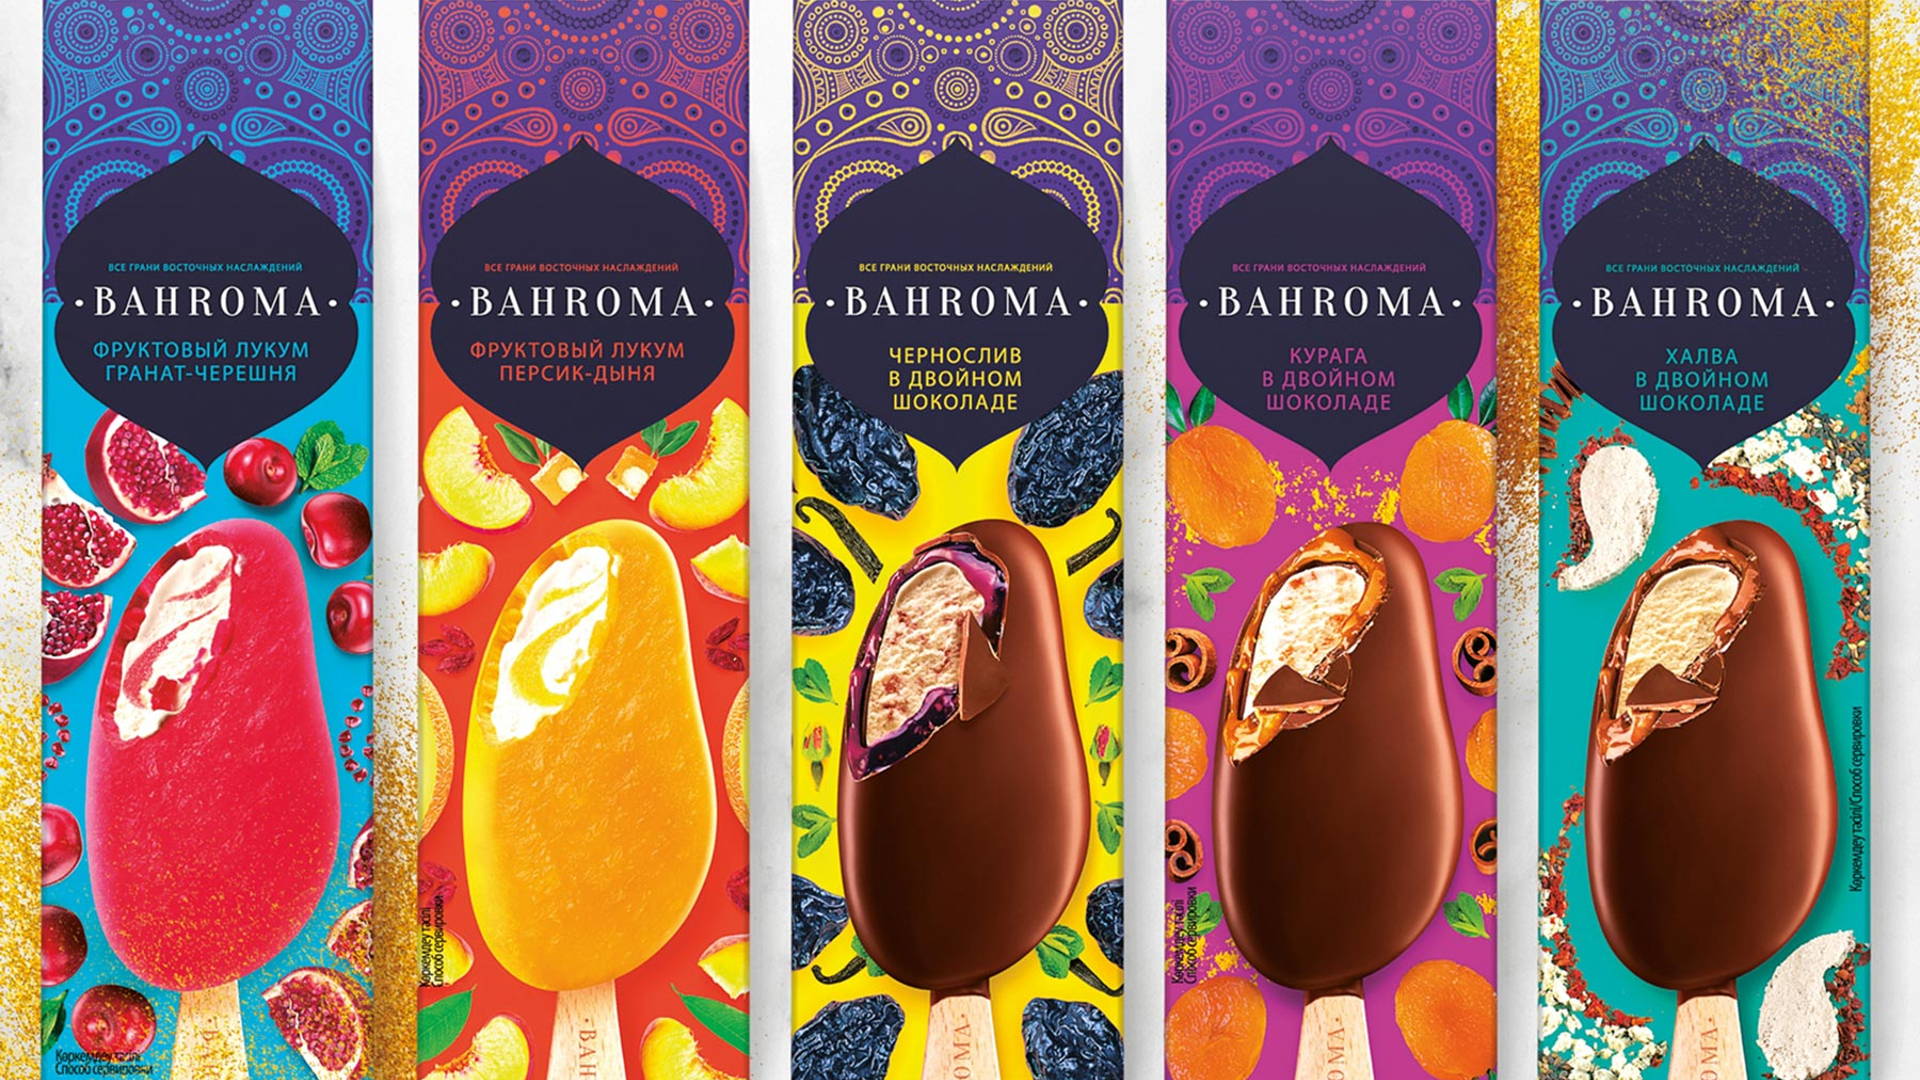 Featured image for Bahroma Ice Cream's Packaging Captures the Colorful Spirit of Asia